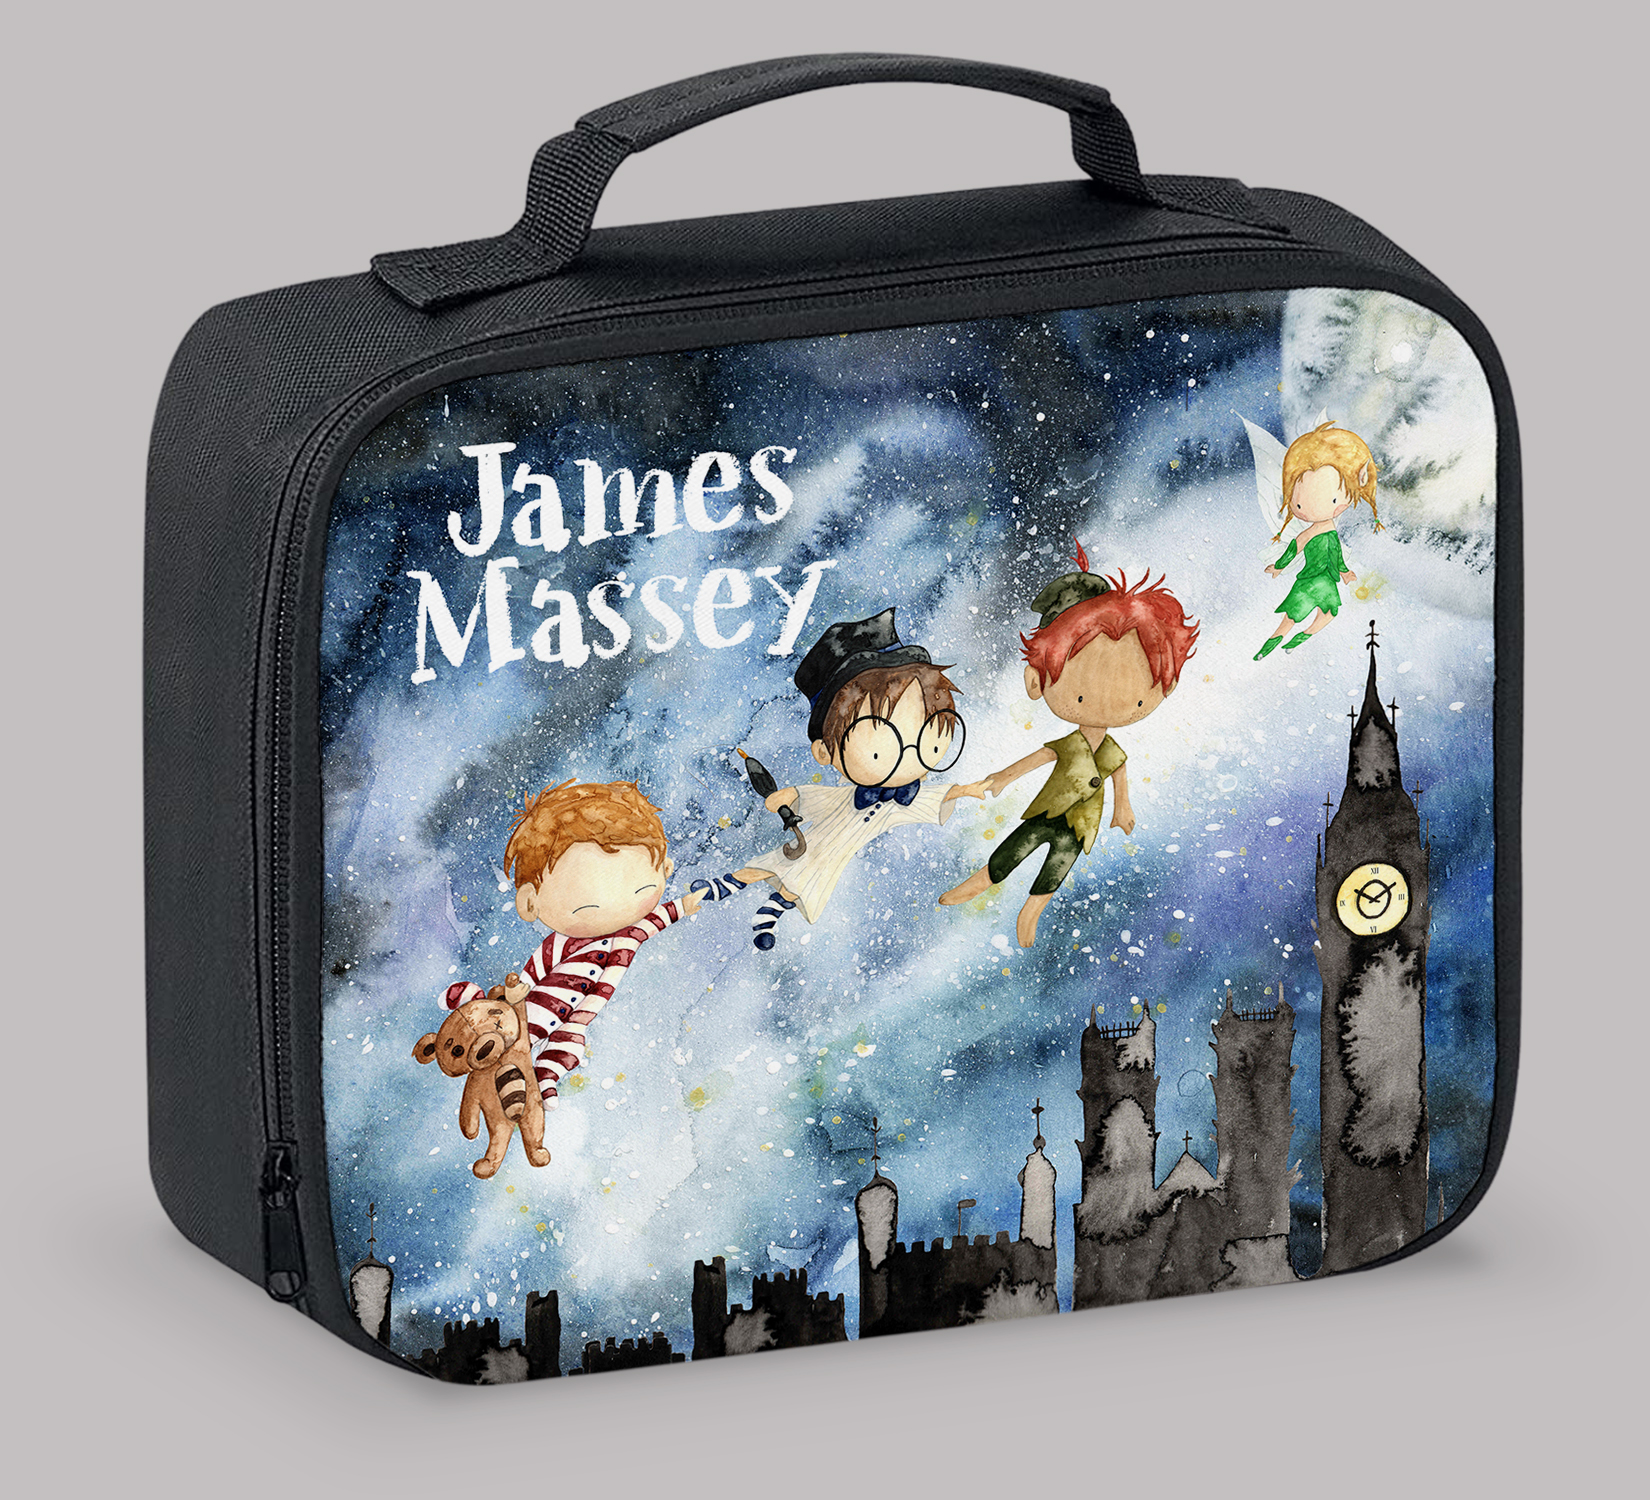 children's insulated lunch bag with bright colourful personalised printed design in disney peter pan and tinkerbel theme